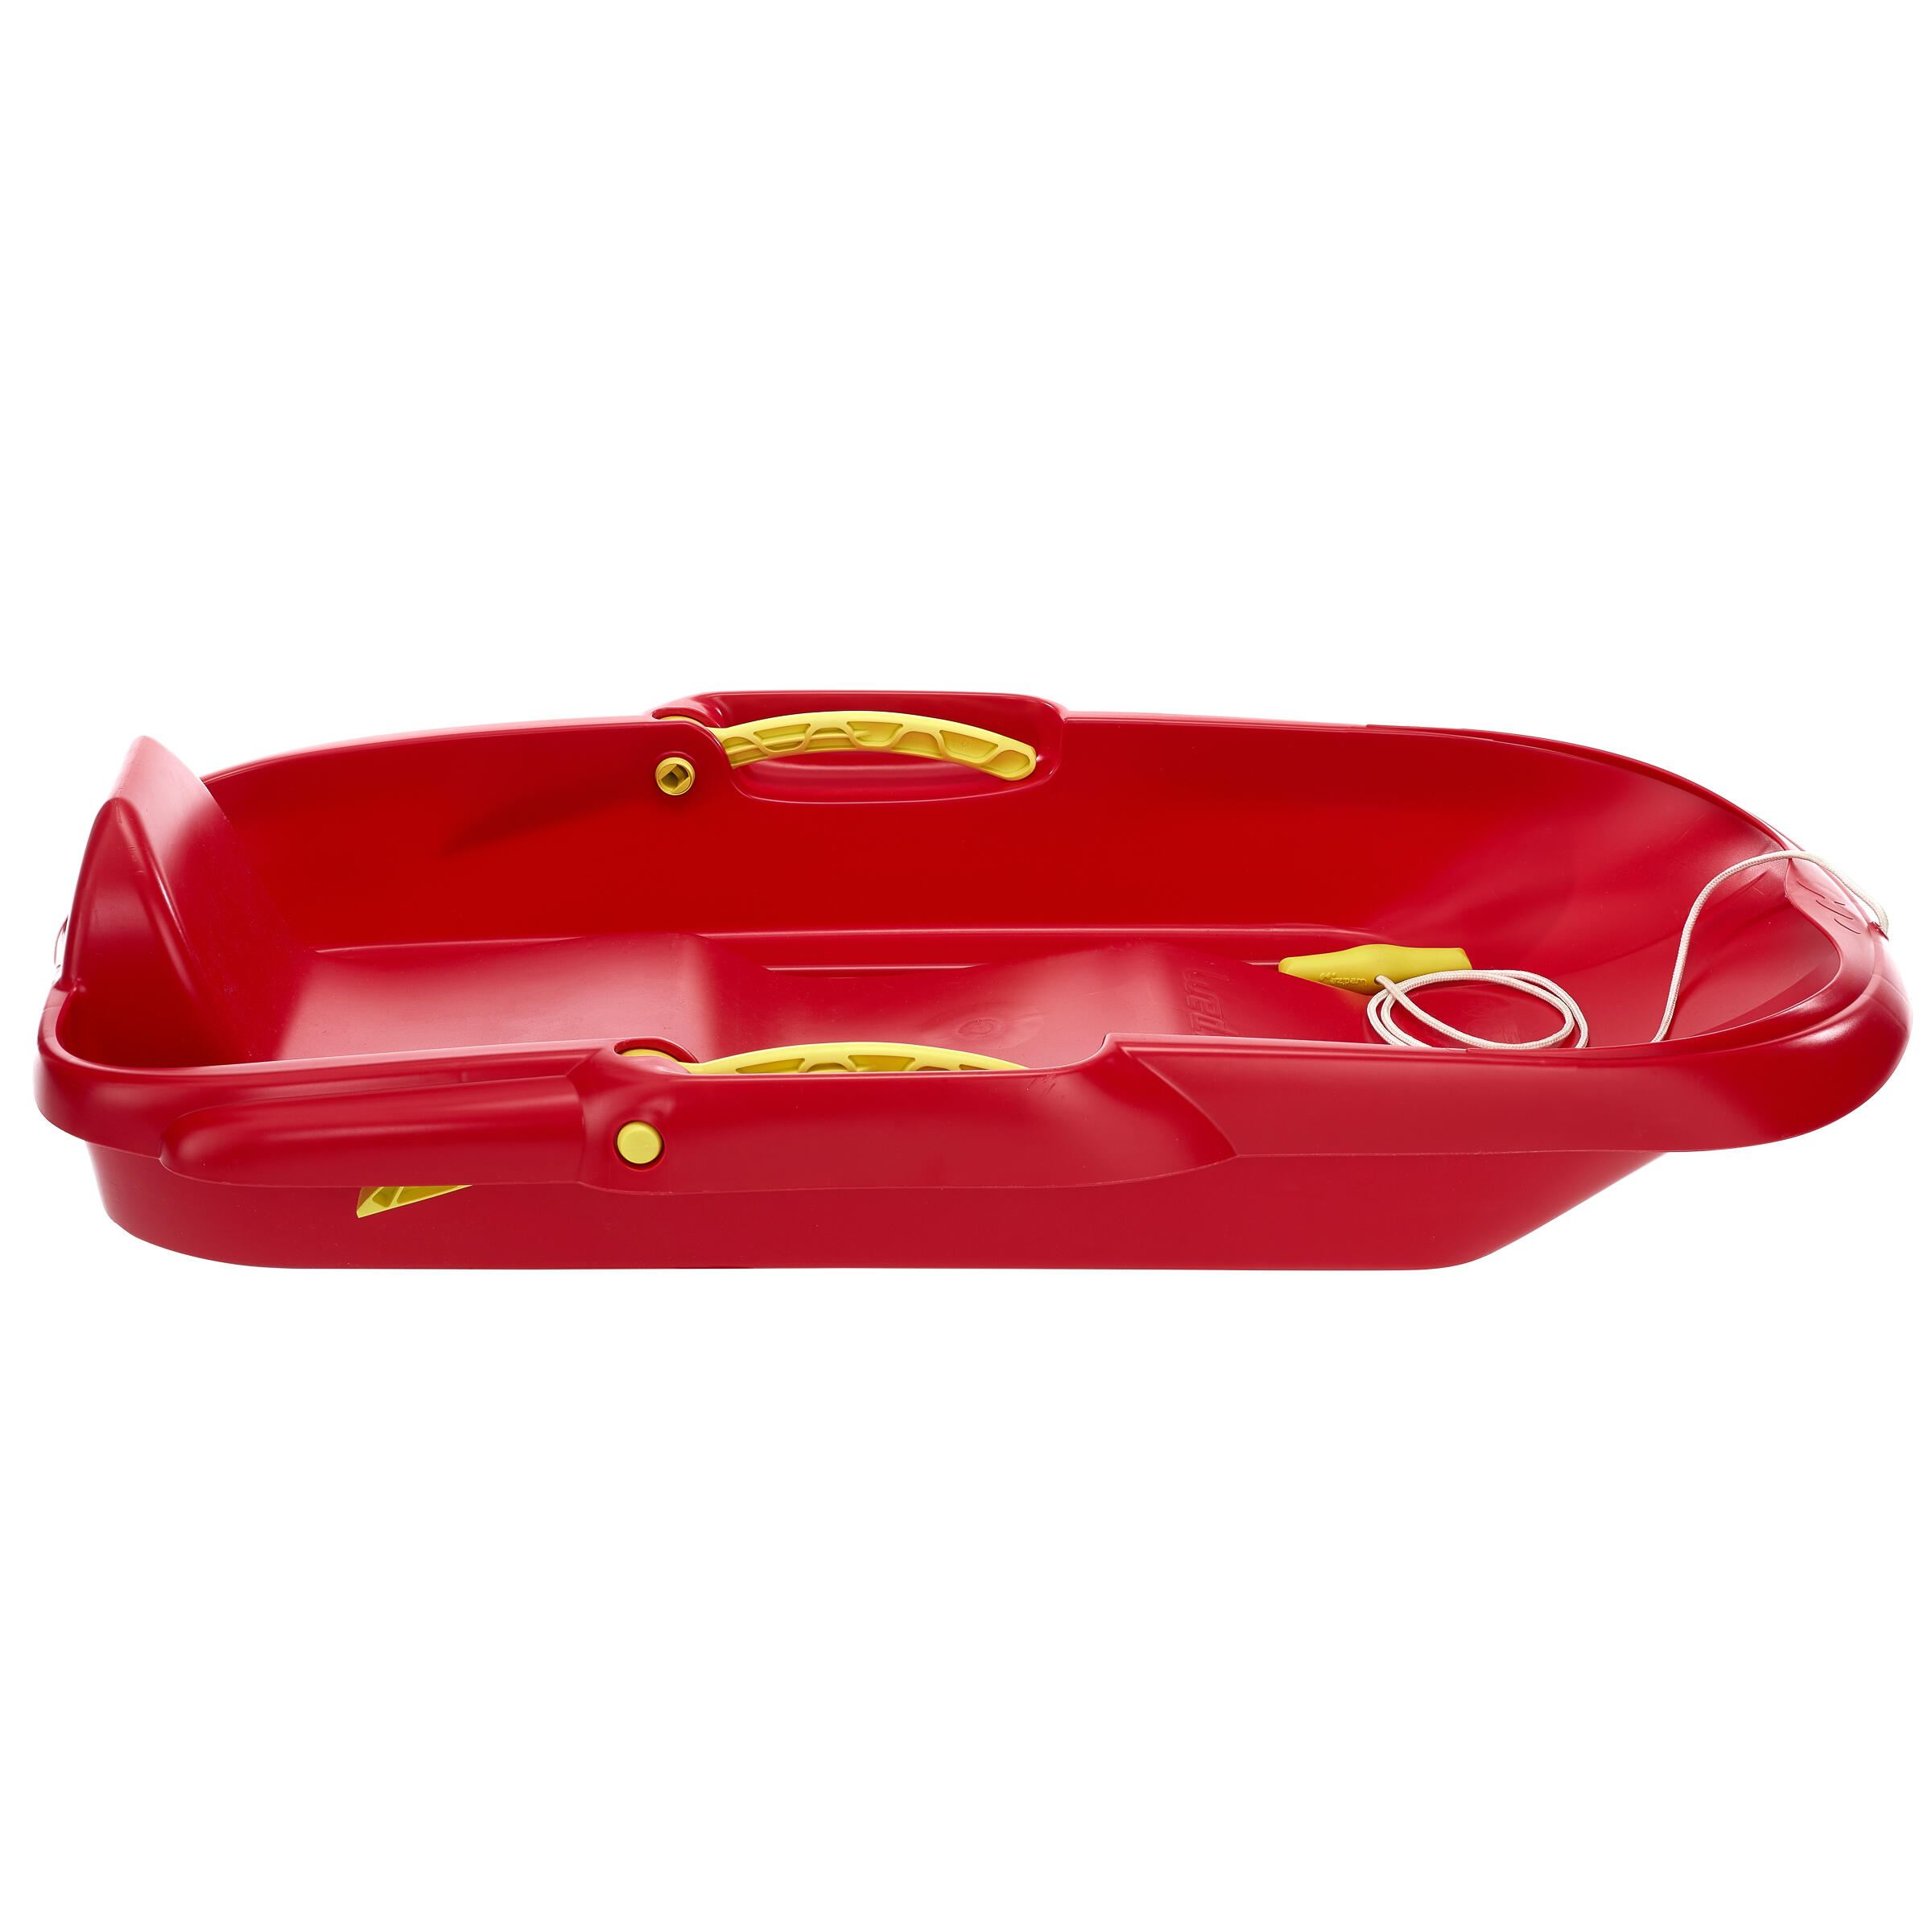 MRZ 100 2-Person Sledge With Brake - Red 2/8